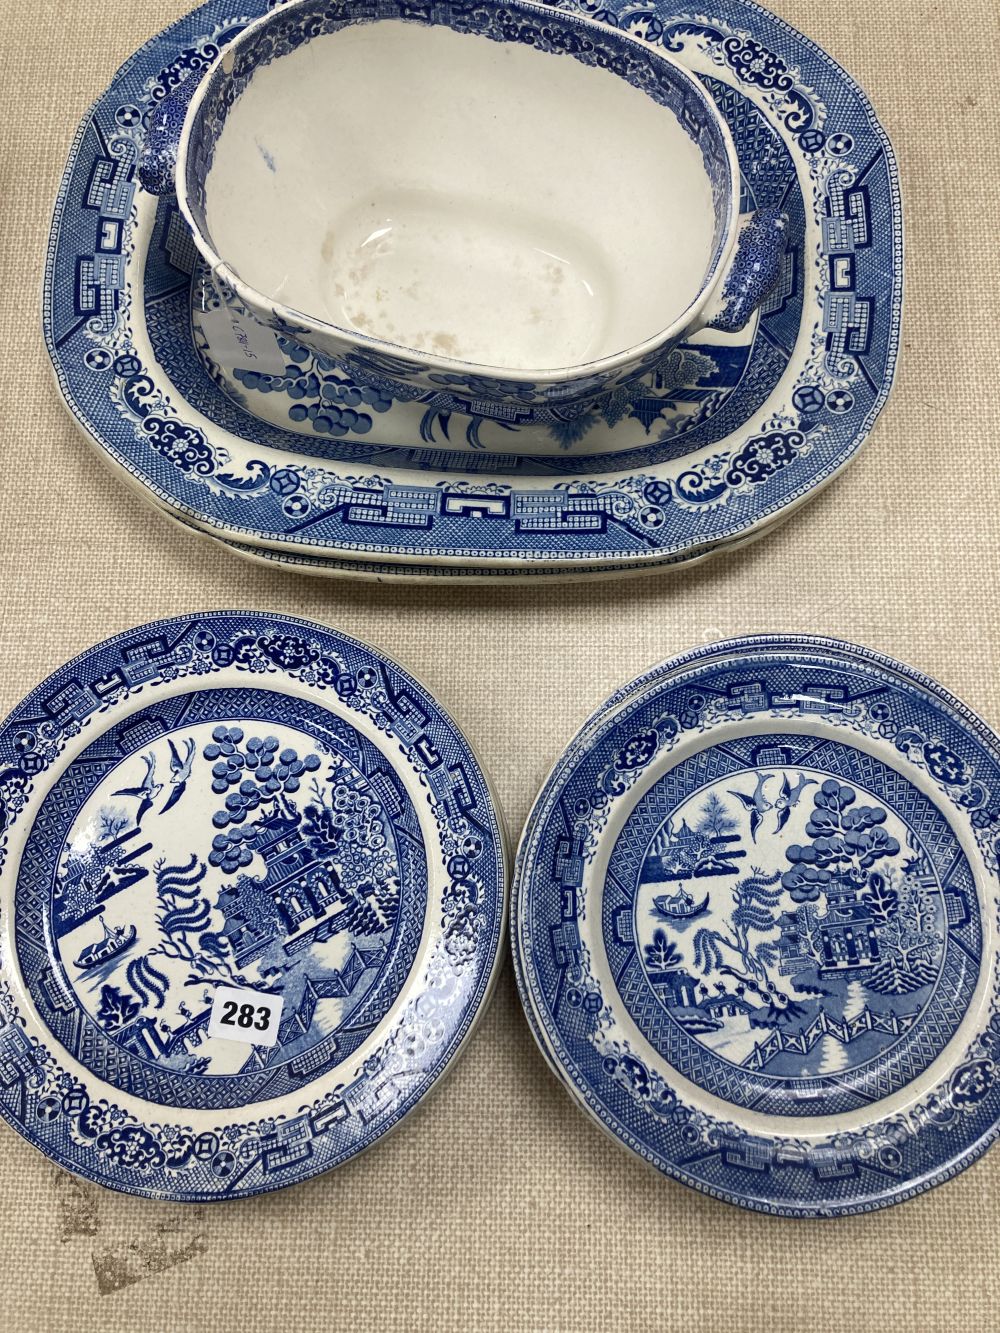 A collection of blue and white Willow pattern plates including meat platters, width 44cm and a tureen